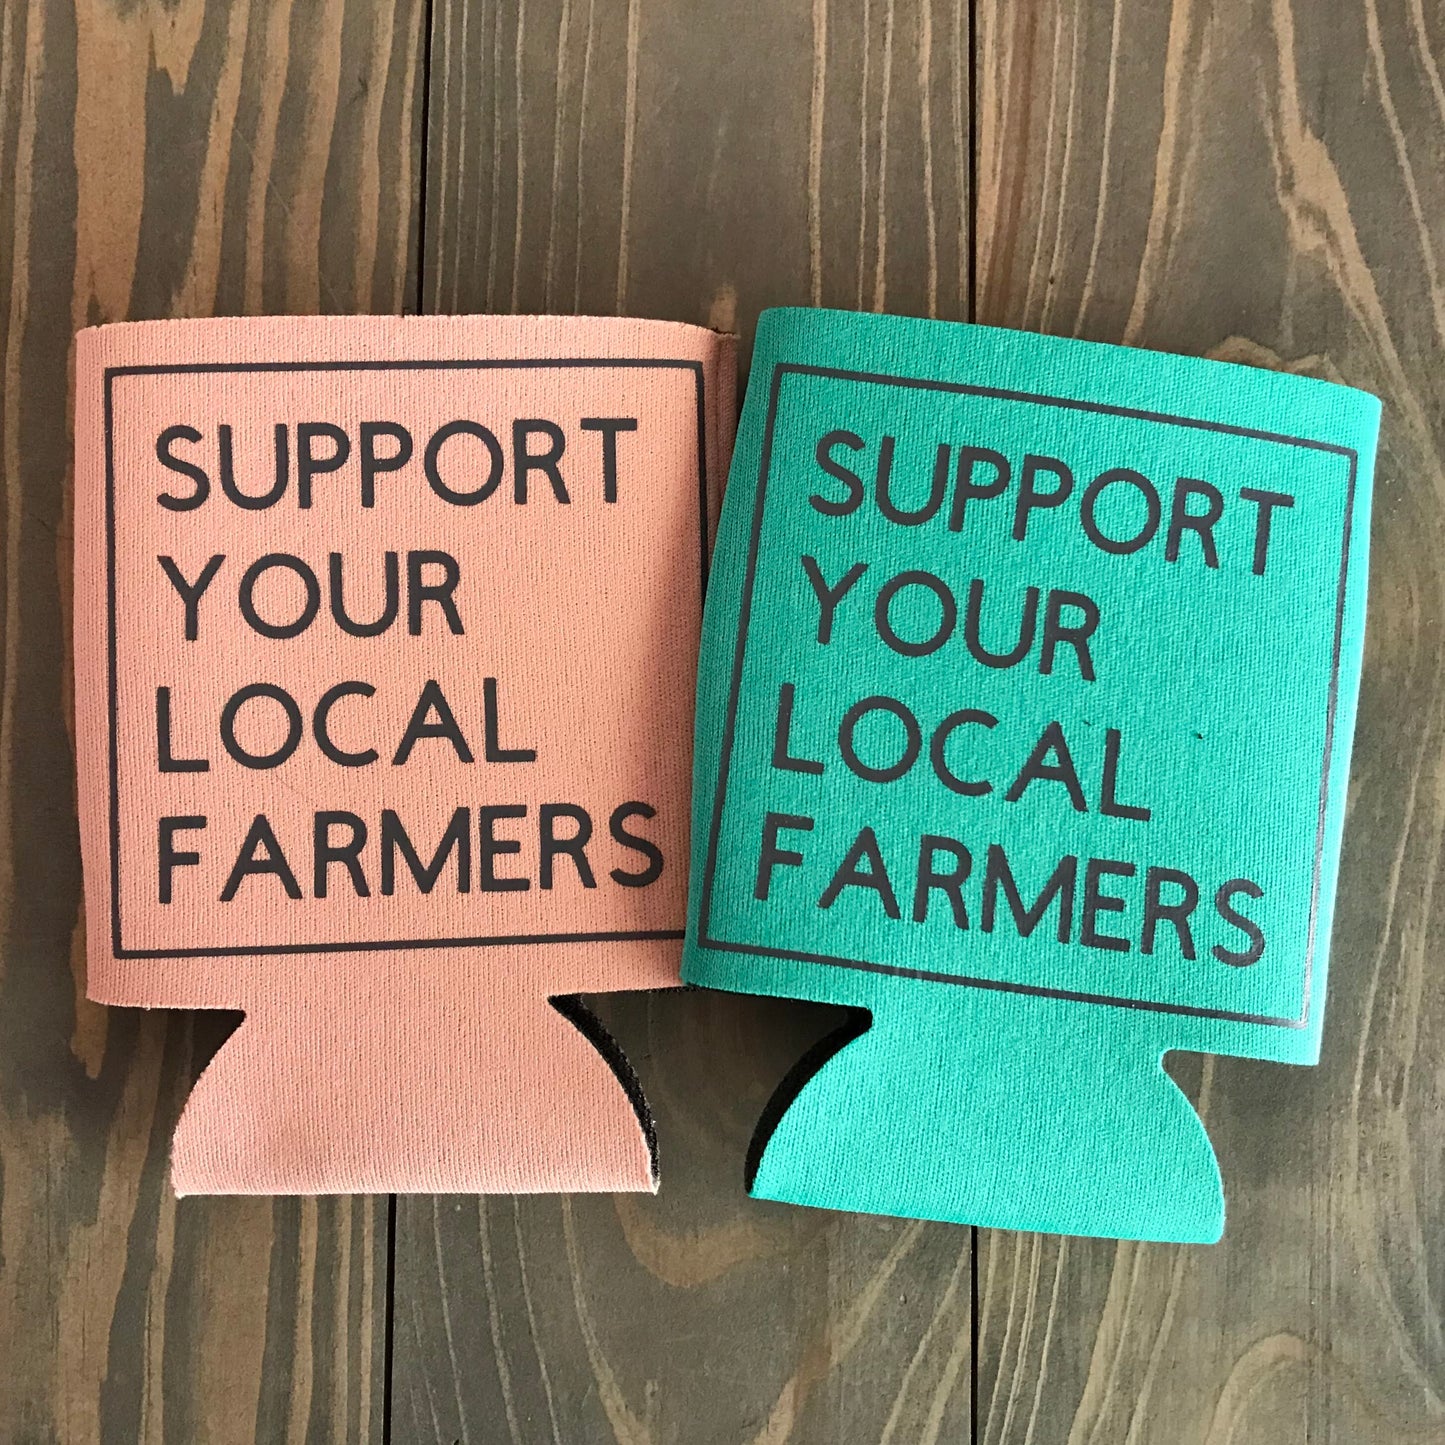 SUPPORT YOUR LOCAL FARMERS